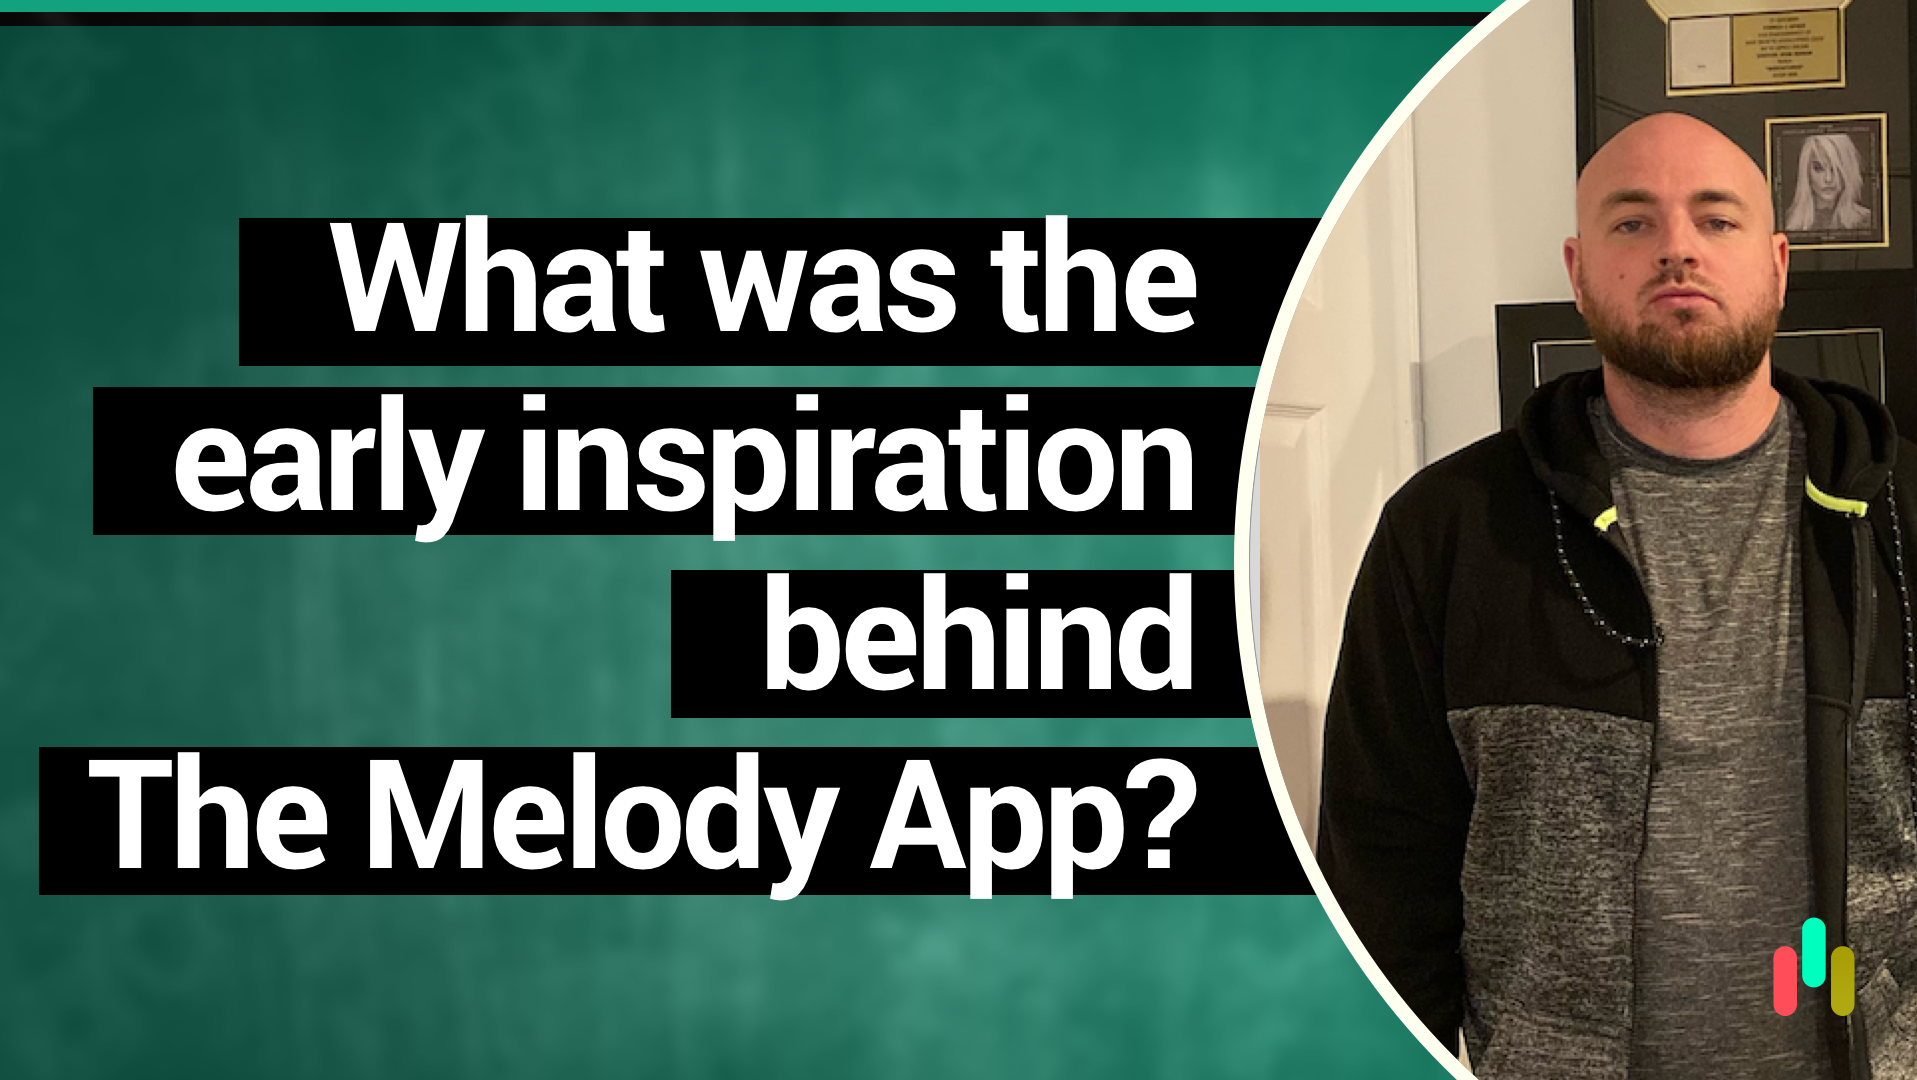 What was the early inspiration for The Melody App?